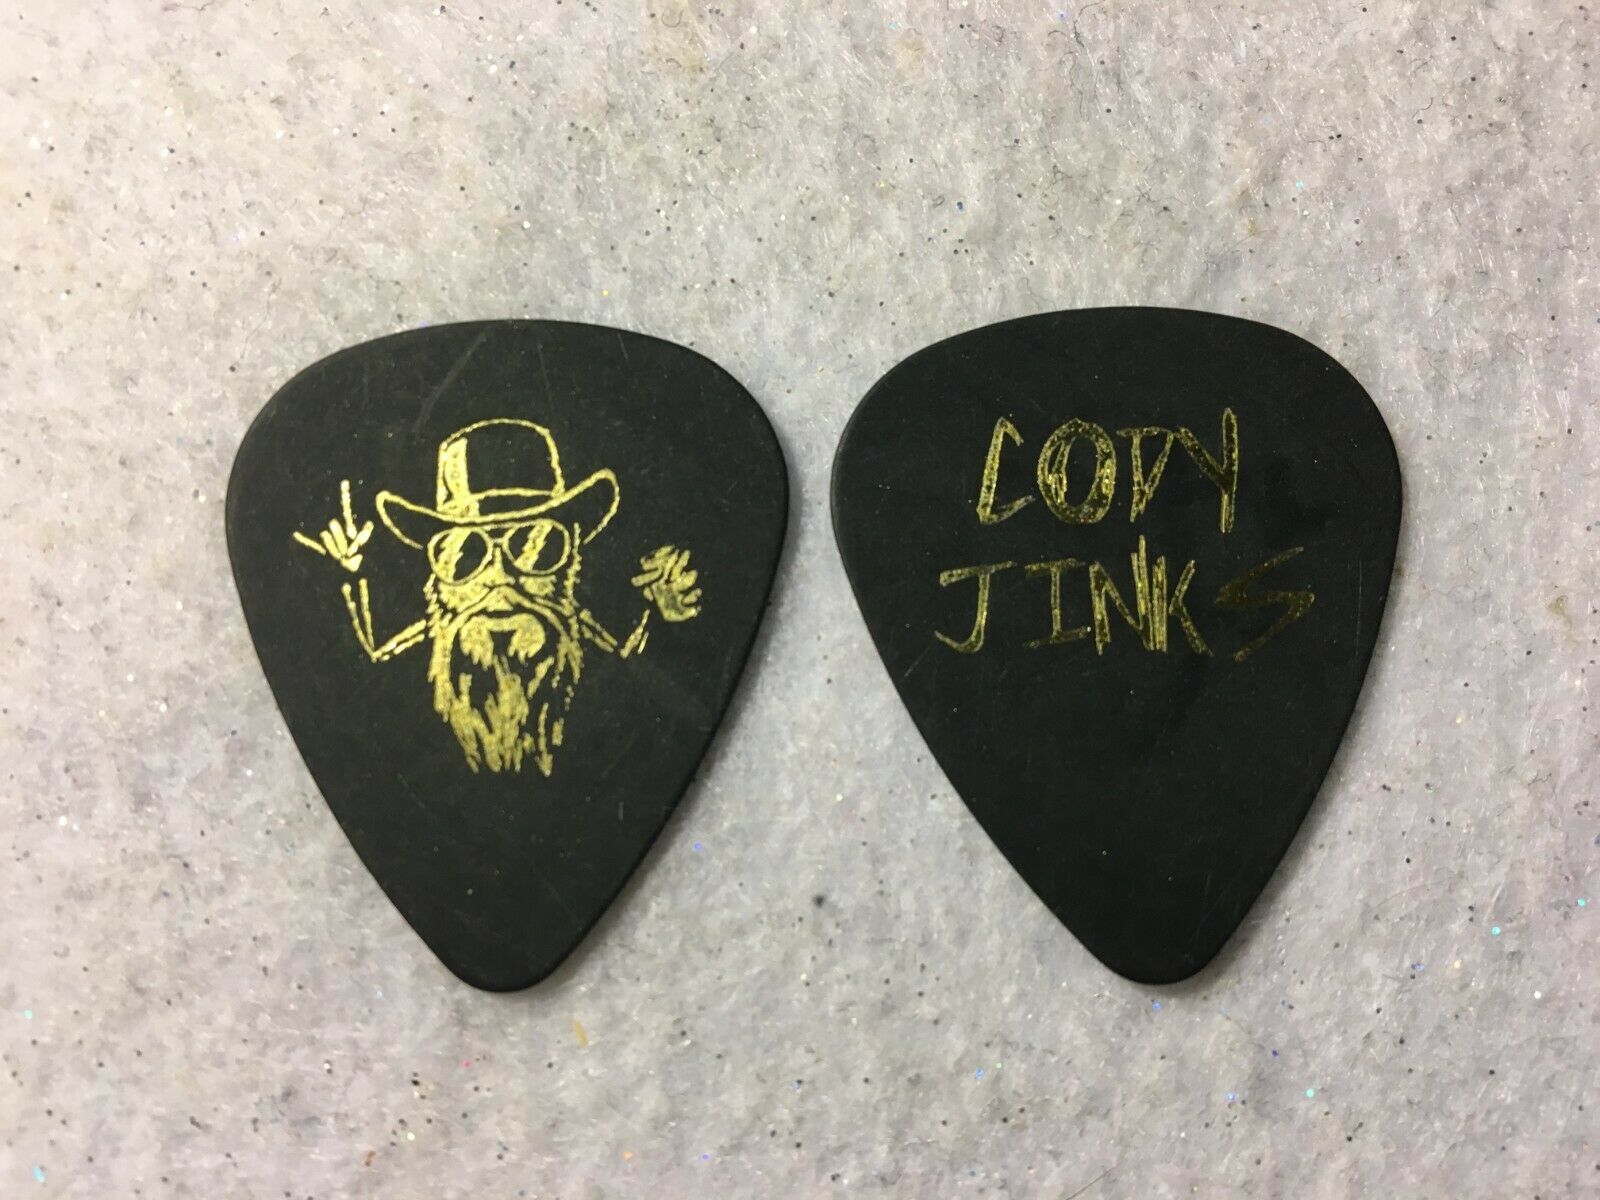 Cody Jinks 2020 "the Wanting" Tour Issue Guitar Pick - No Lot   Ultra Rare